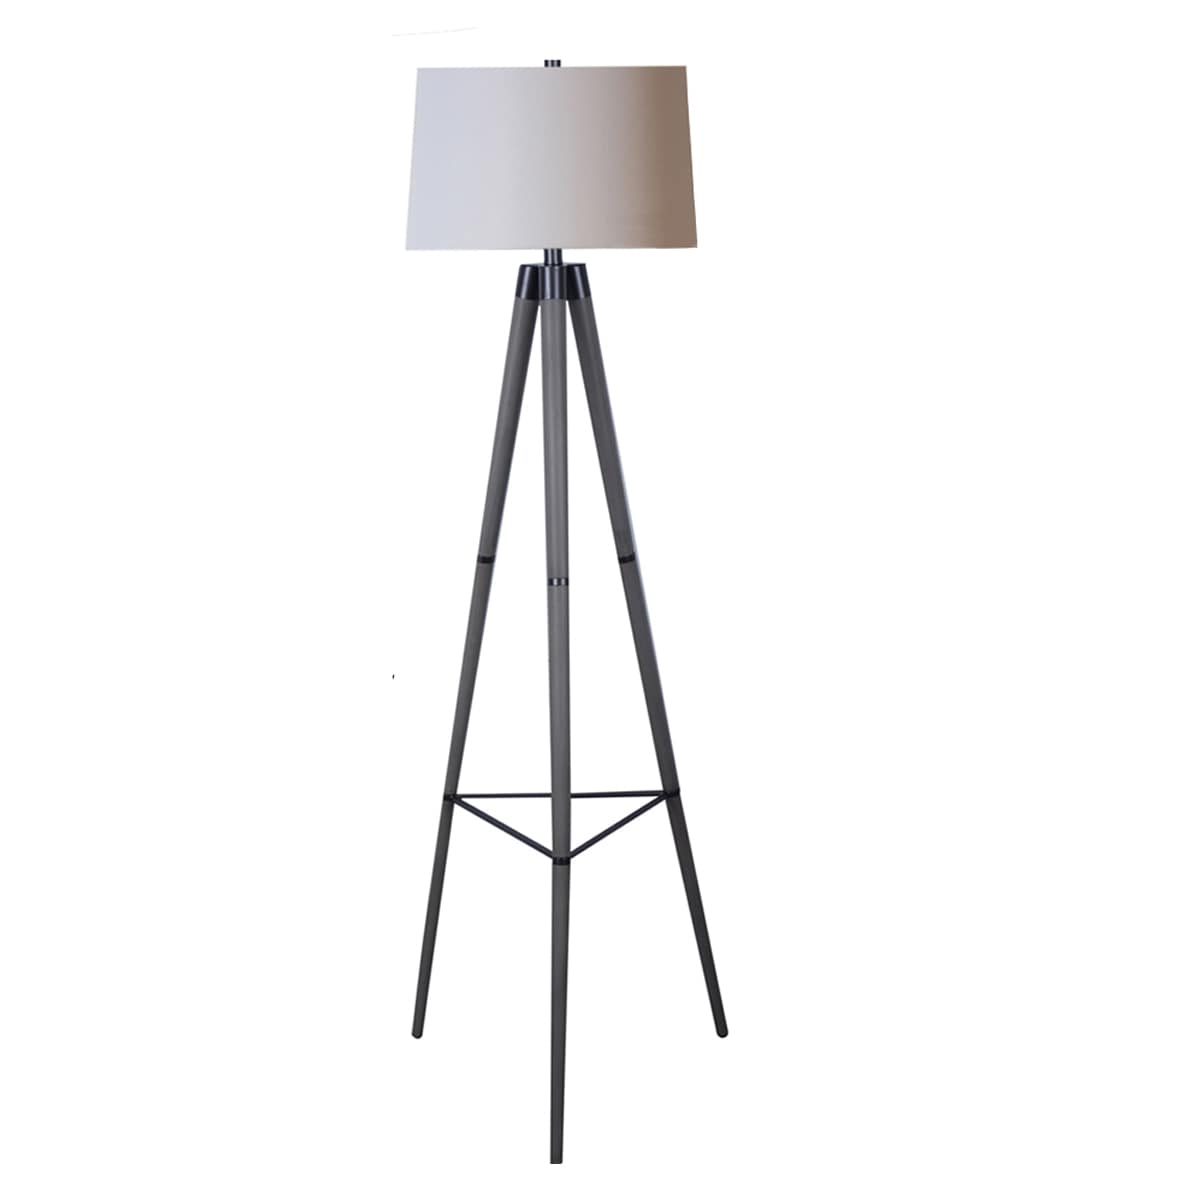 Allen + roth 61.75-in Grey Shaded Floor Lamp in the Floor Lamps department  at Lowes.com